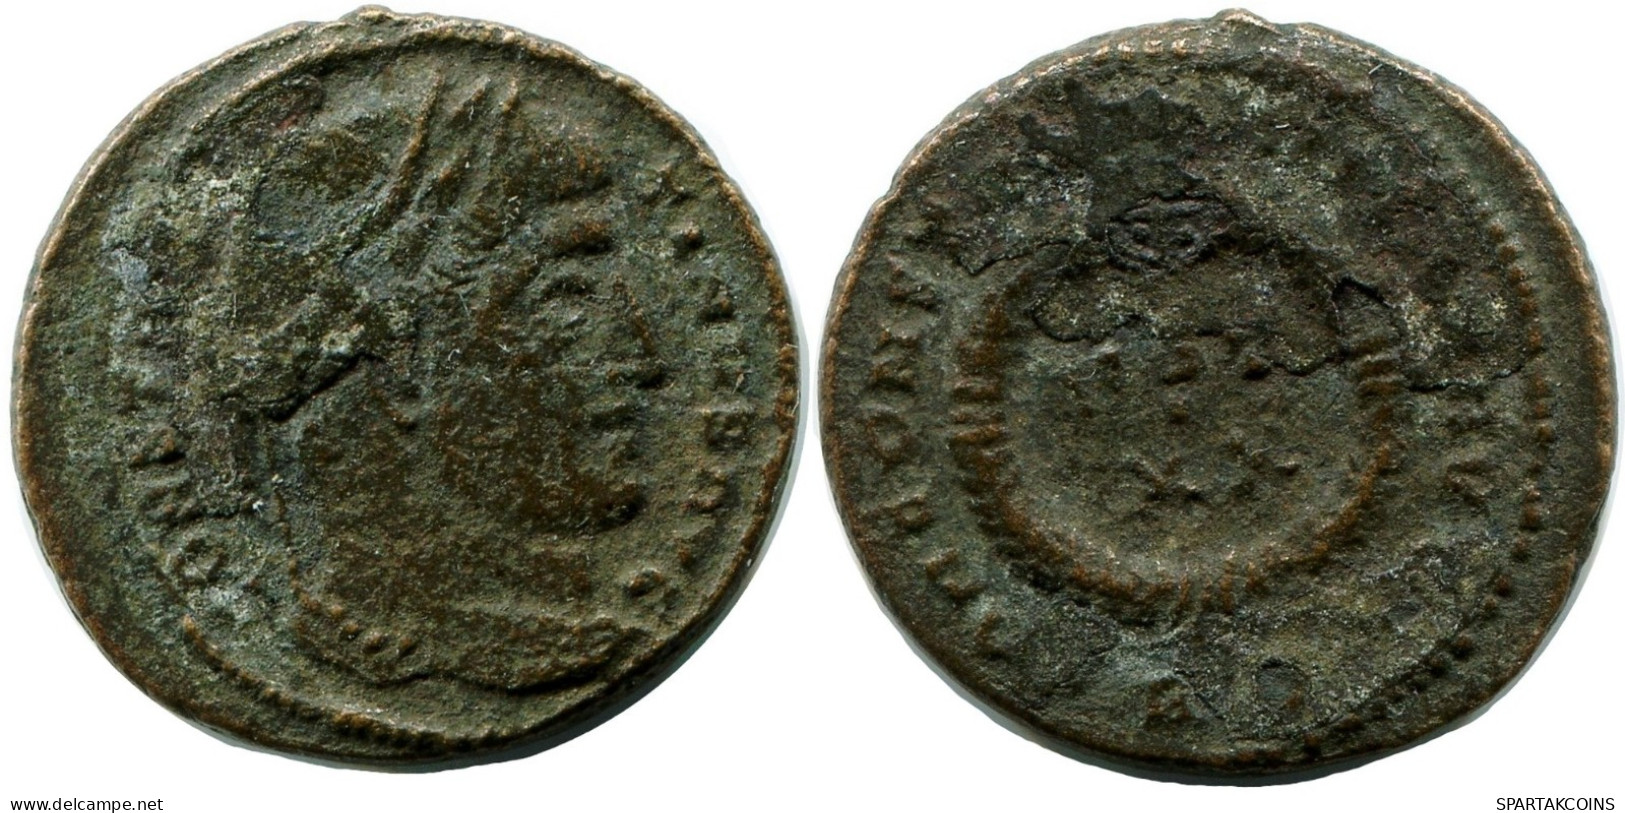 CONSTANTINE I MINTED IN ROME ITALY FOUND IN IHNASYAH HOARD EGYPT #ANC11166.14.E.A - The Christian Empire (307 AD To 363 AD)